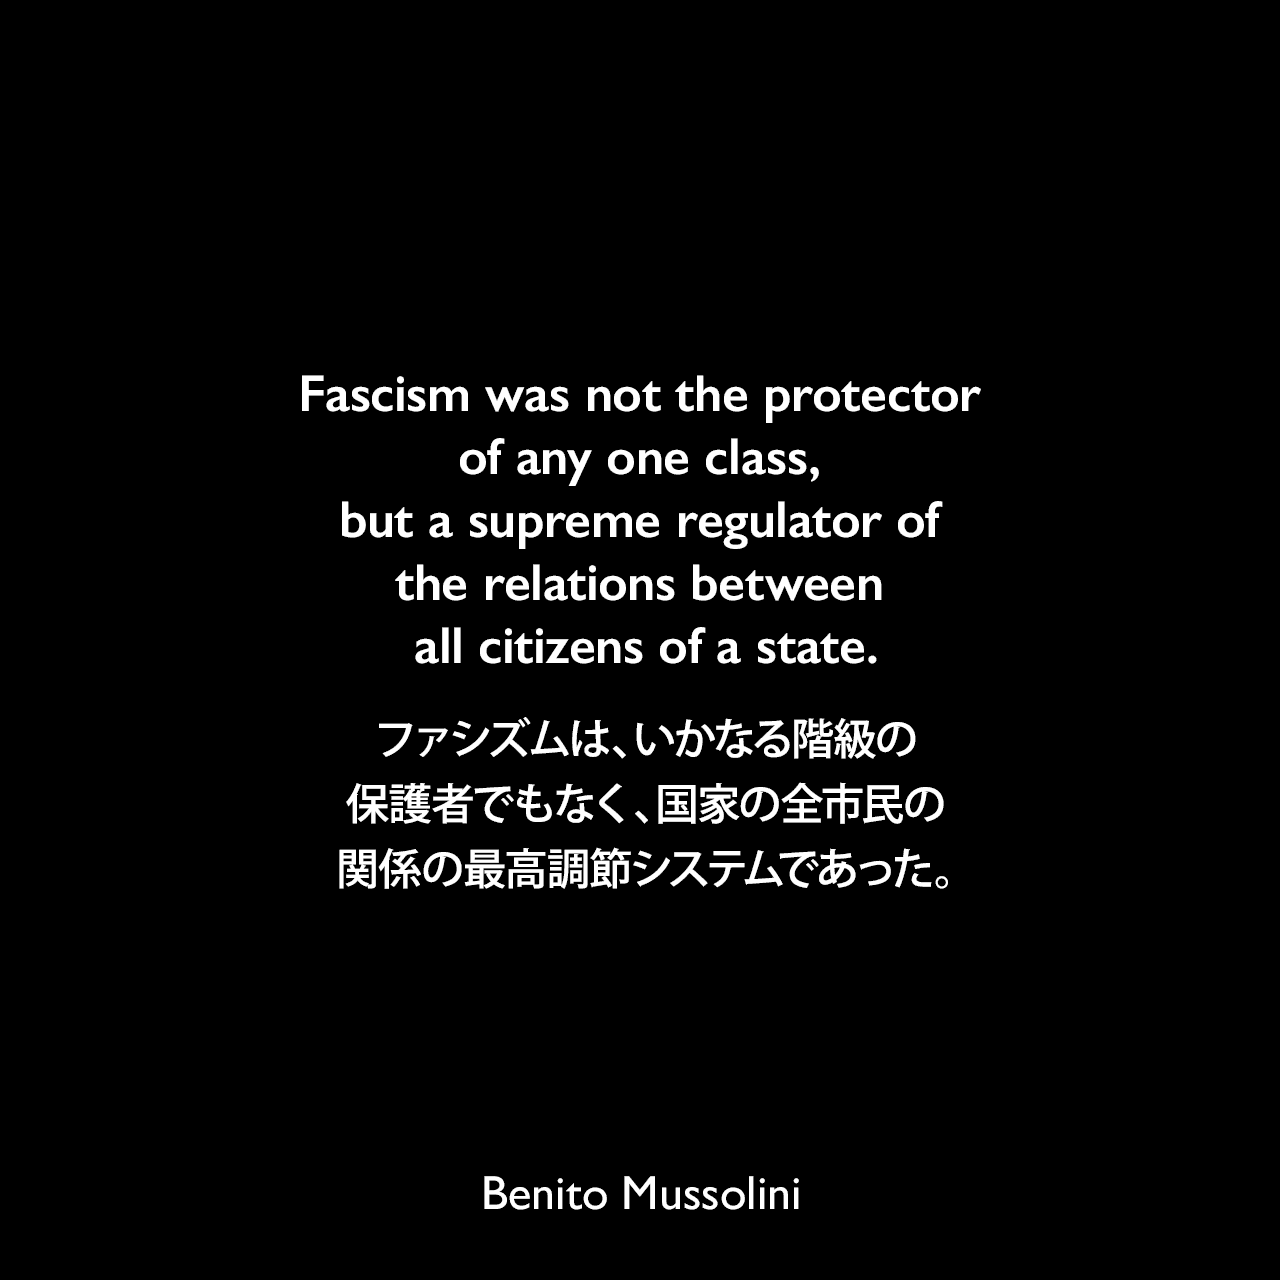 Fascism was not the protector of any one class, but a supreme regulator of the relations between all citizens of a state.ファシズムは、いかなる階級の保護者でもなく、国家の全市民の関係の最高調節システムであった。- ムッソリーニによる自伝「My Autobiography」（1928年）よりBenito Mussolini